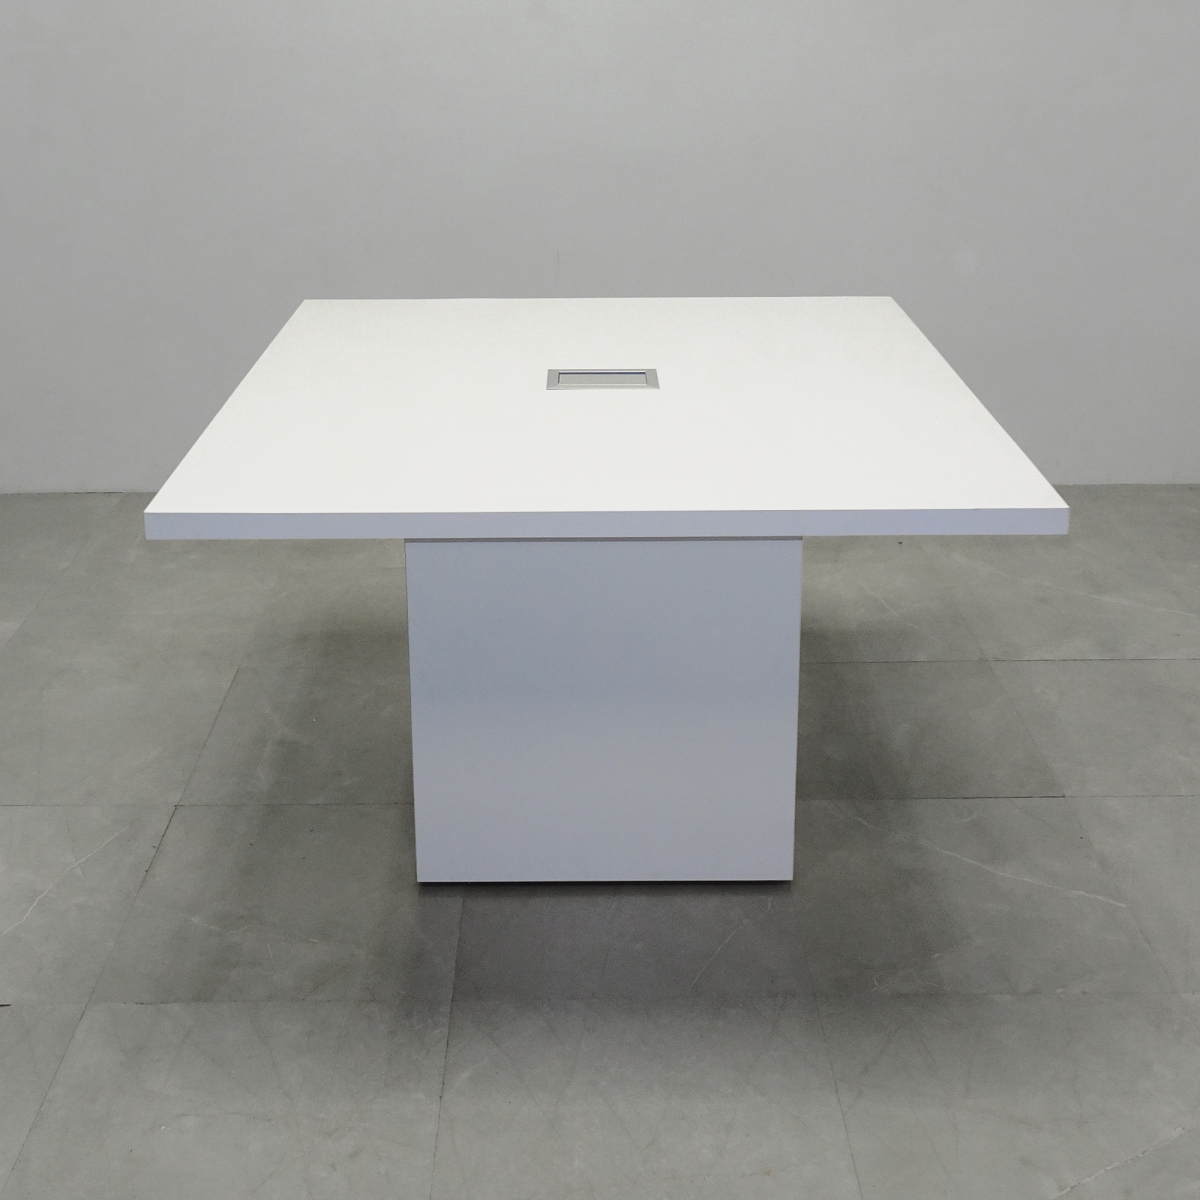 54 in. Axis Square Meeting Table - Stock # 1001-S